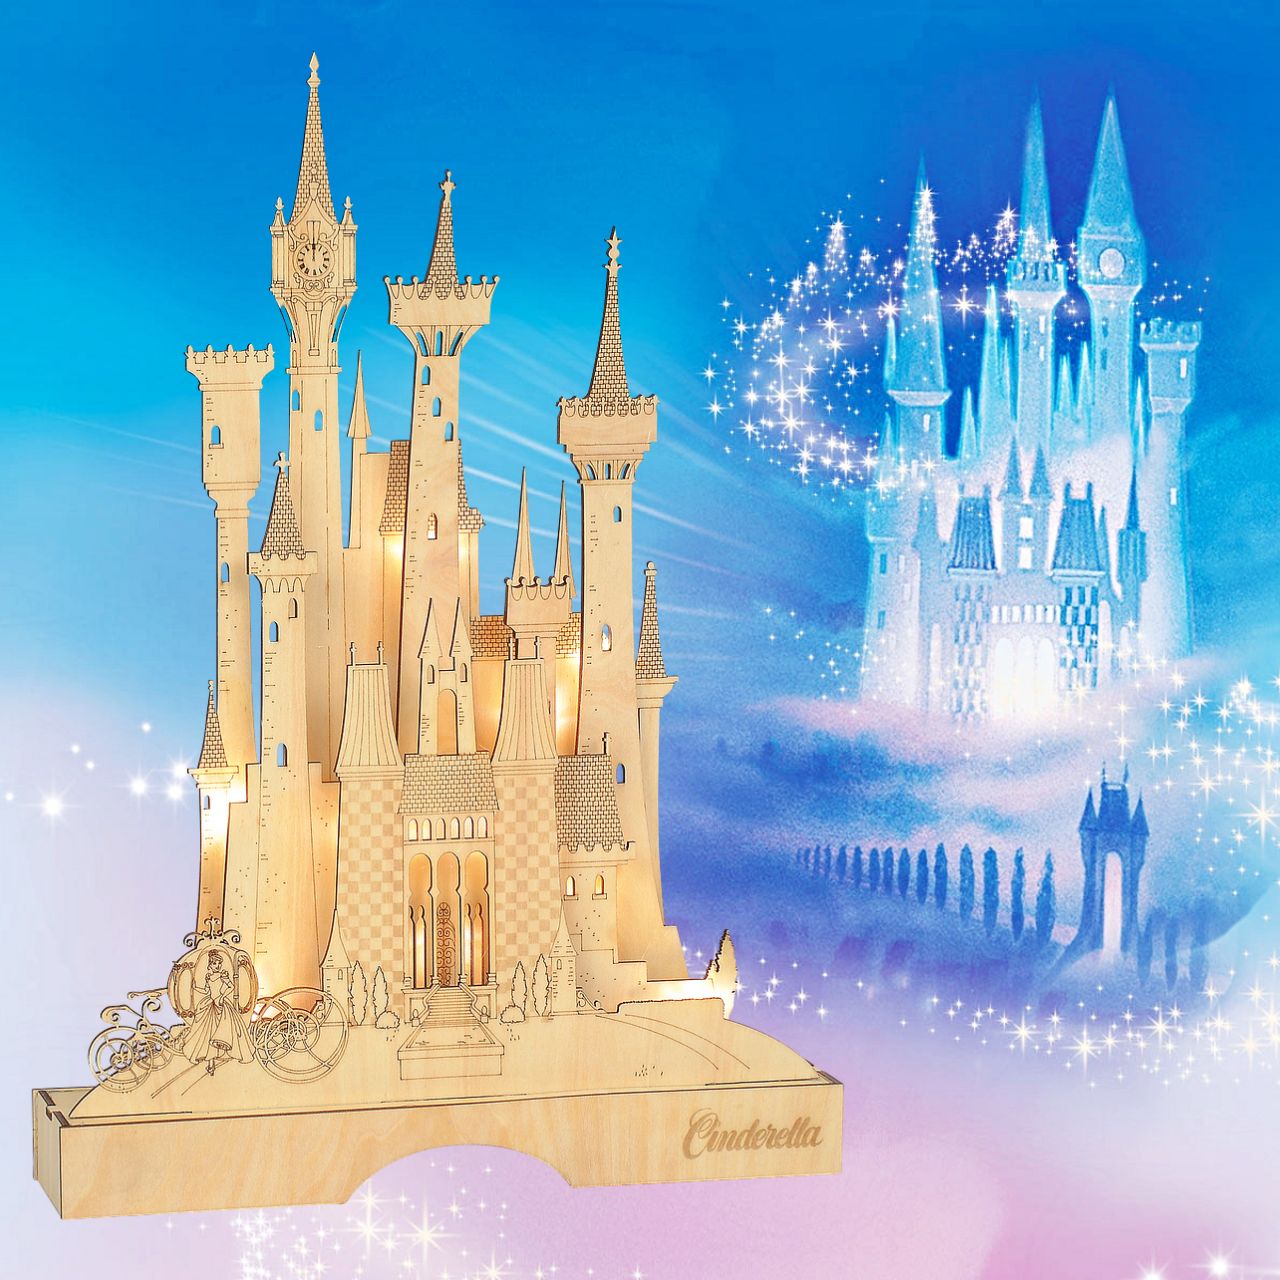 Department 56 Disney Cinderella Illuminated Castle  The King's Castle glows with a warm magic as Cinderella can be seen stepping out of her pumpkin carriage ready to meet her Prince Charming. The natural elements of the Basswood are carefully crafted and layered to build a multidimensional scene.